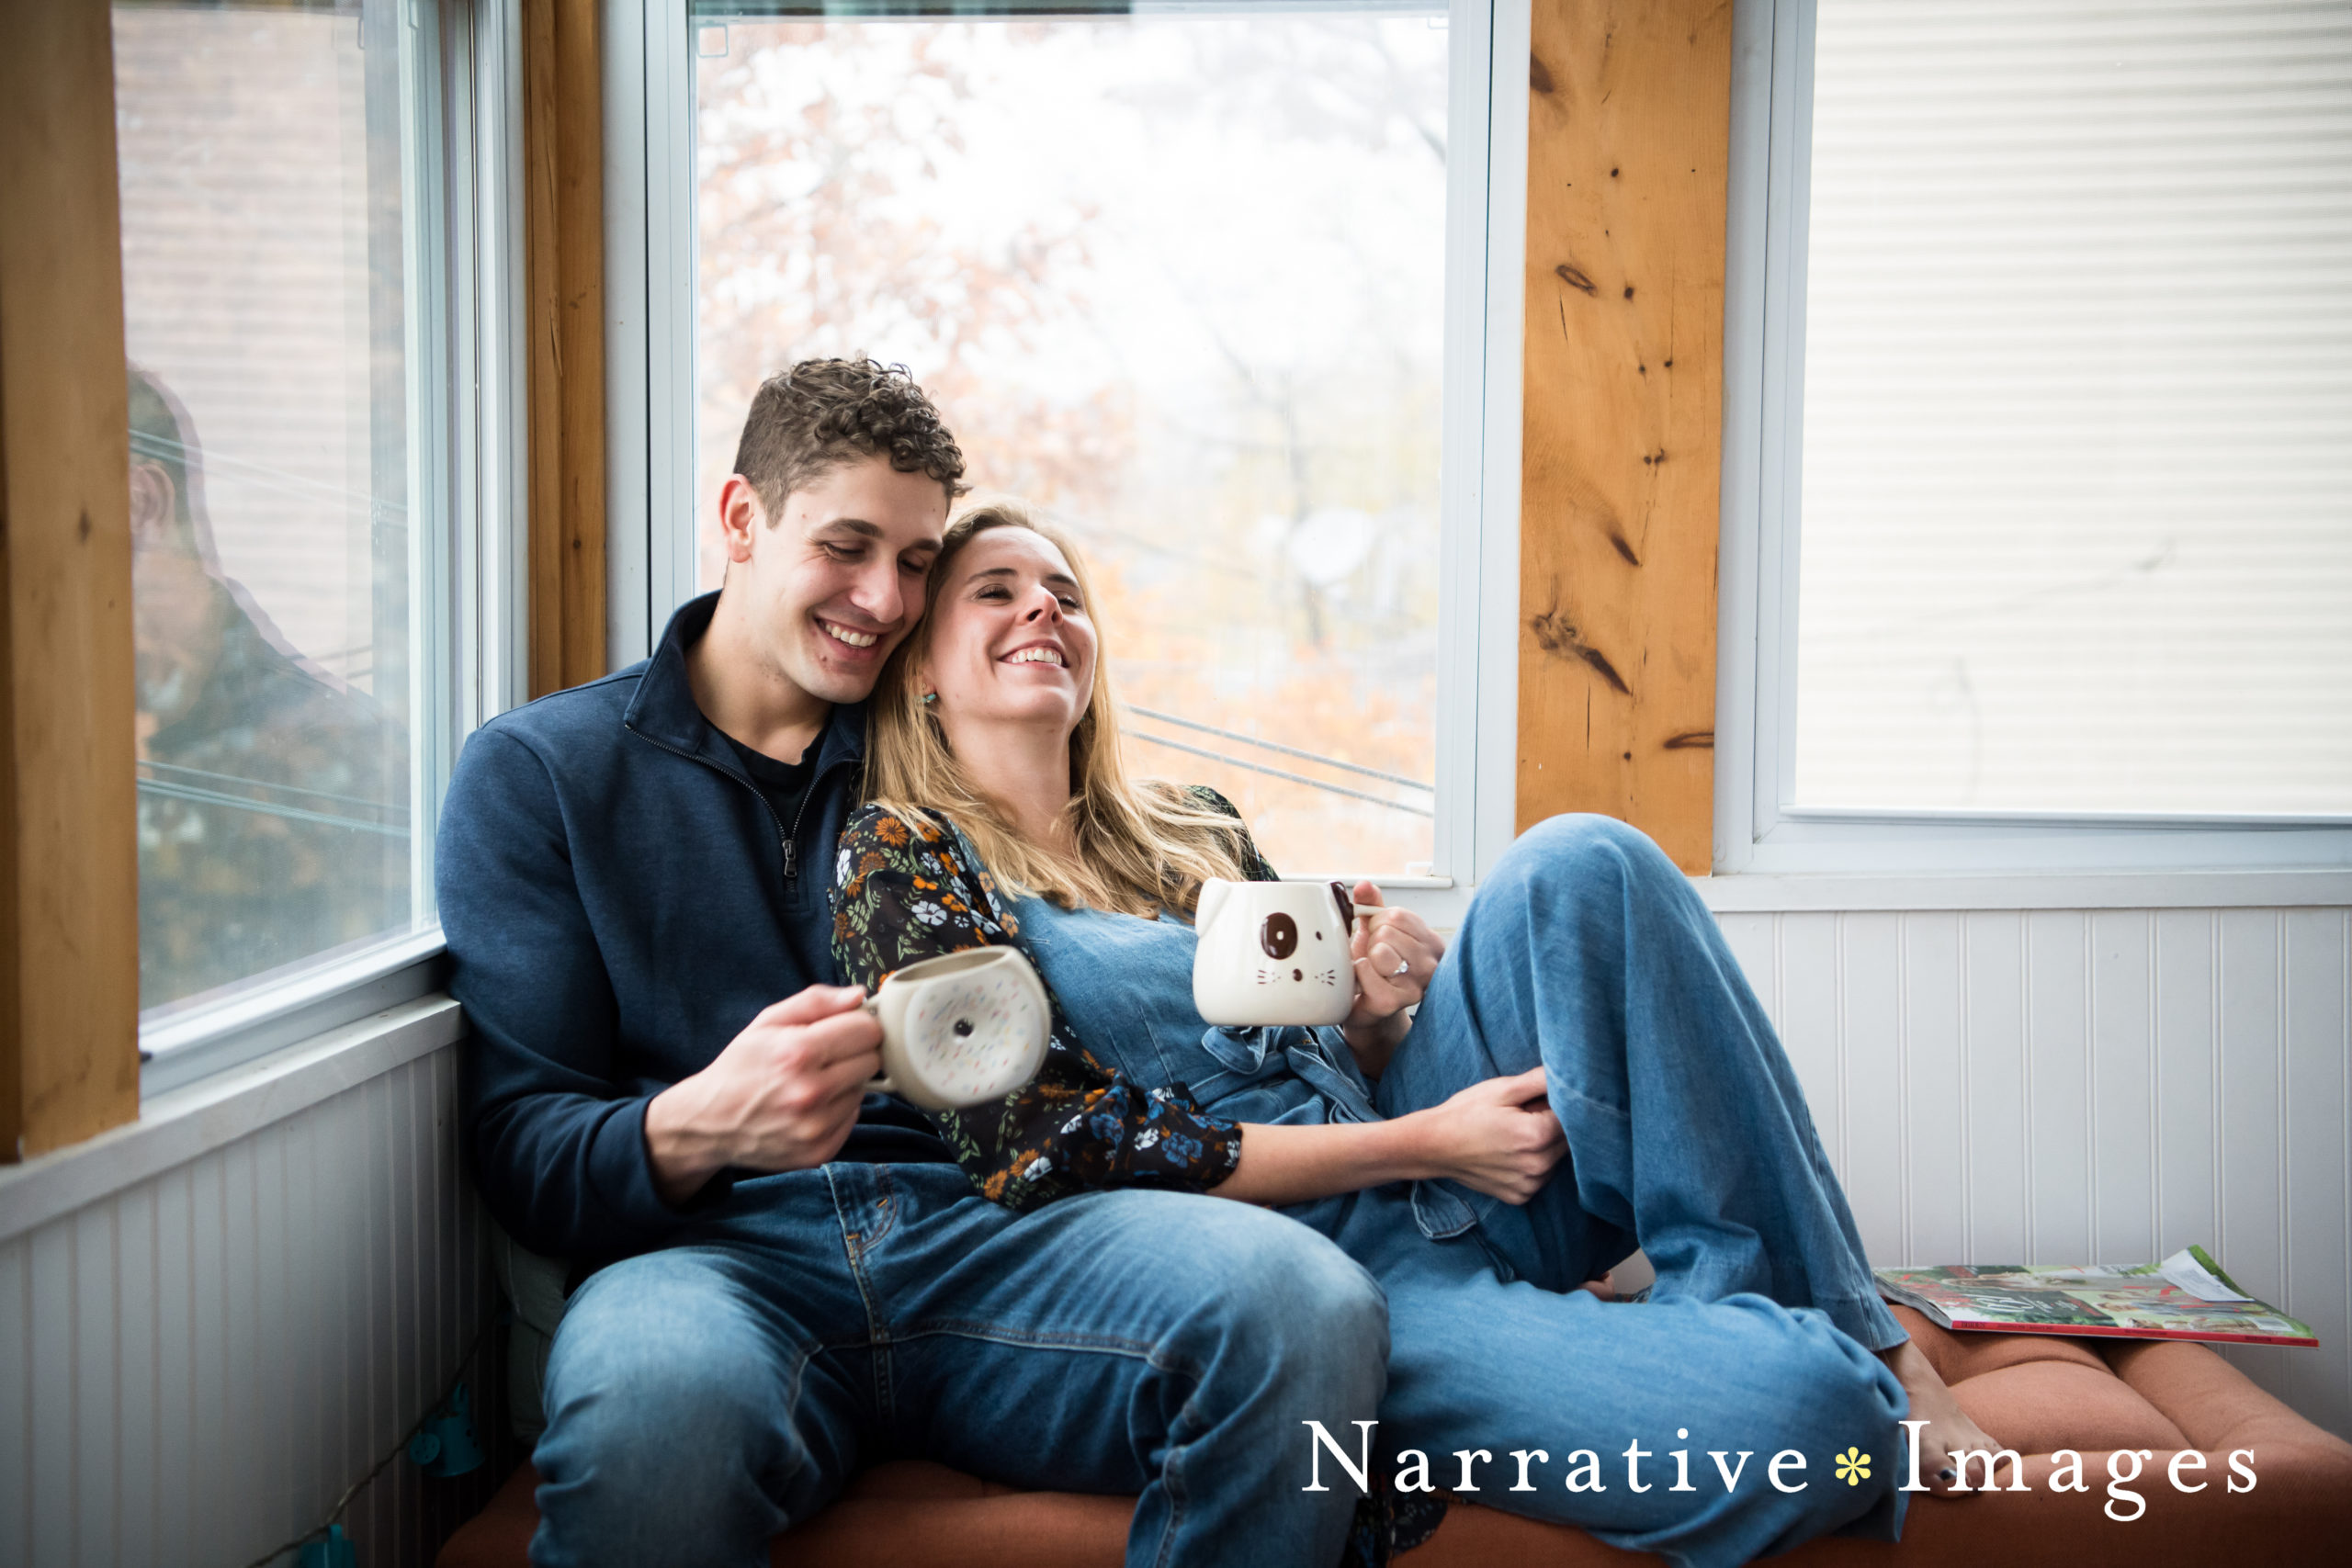 Couple holding mugs and leaning on one another laughing on chaise by windows in their home.